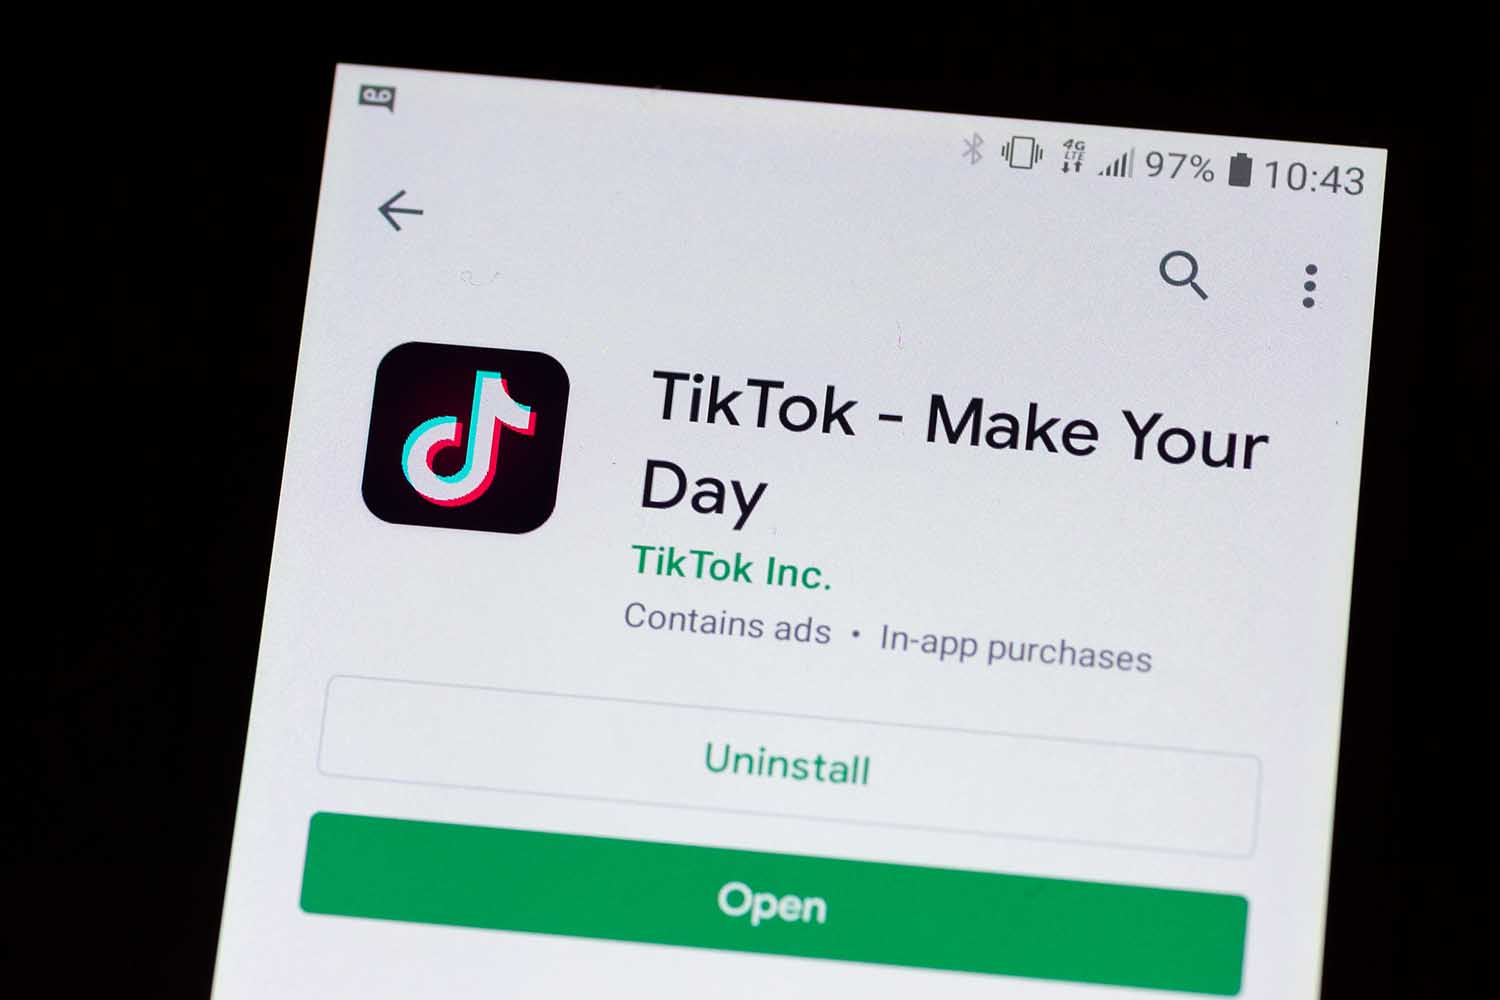 A TikTok logo is seen on a mobile device in Mountain View, California on November 2, 2019 as a photo illustration. (Photo by Yichuan Cao/NurPhoto via Getty Images)